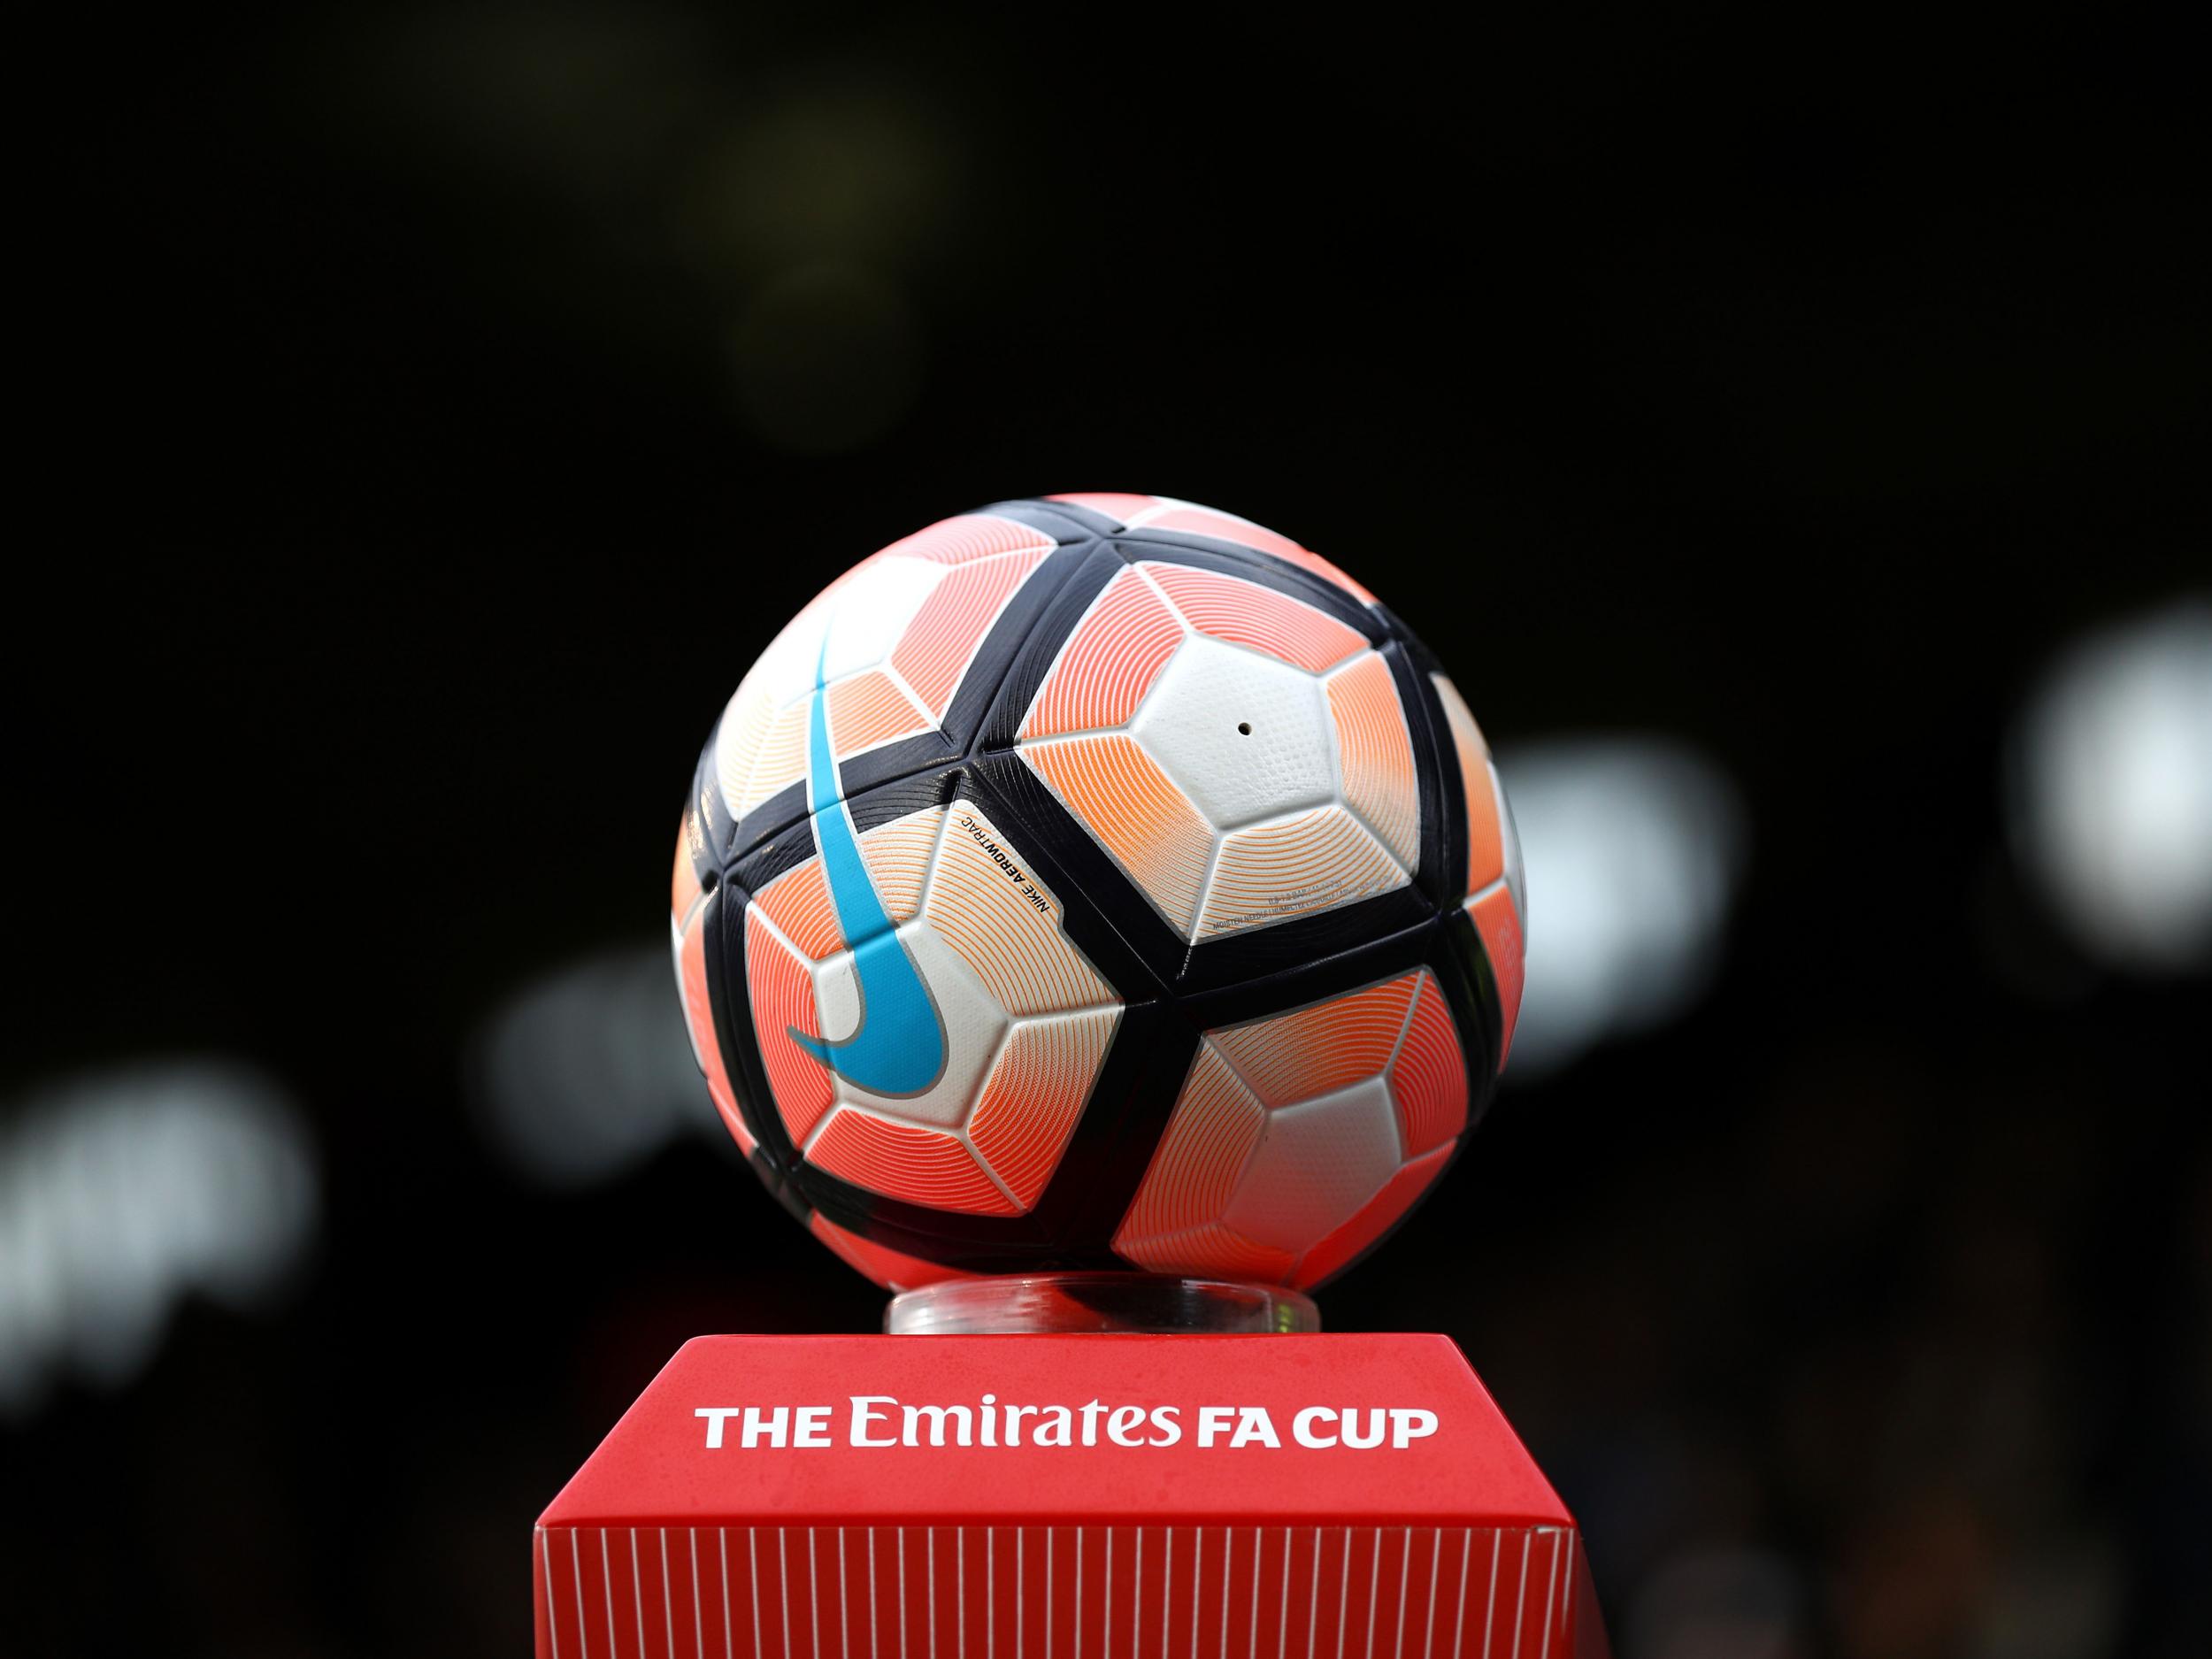 Who will non-league Lincoln City draw in the quarter-finals of the Cup?